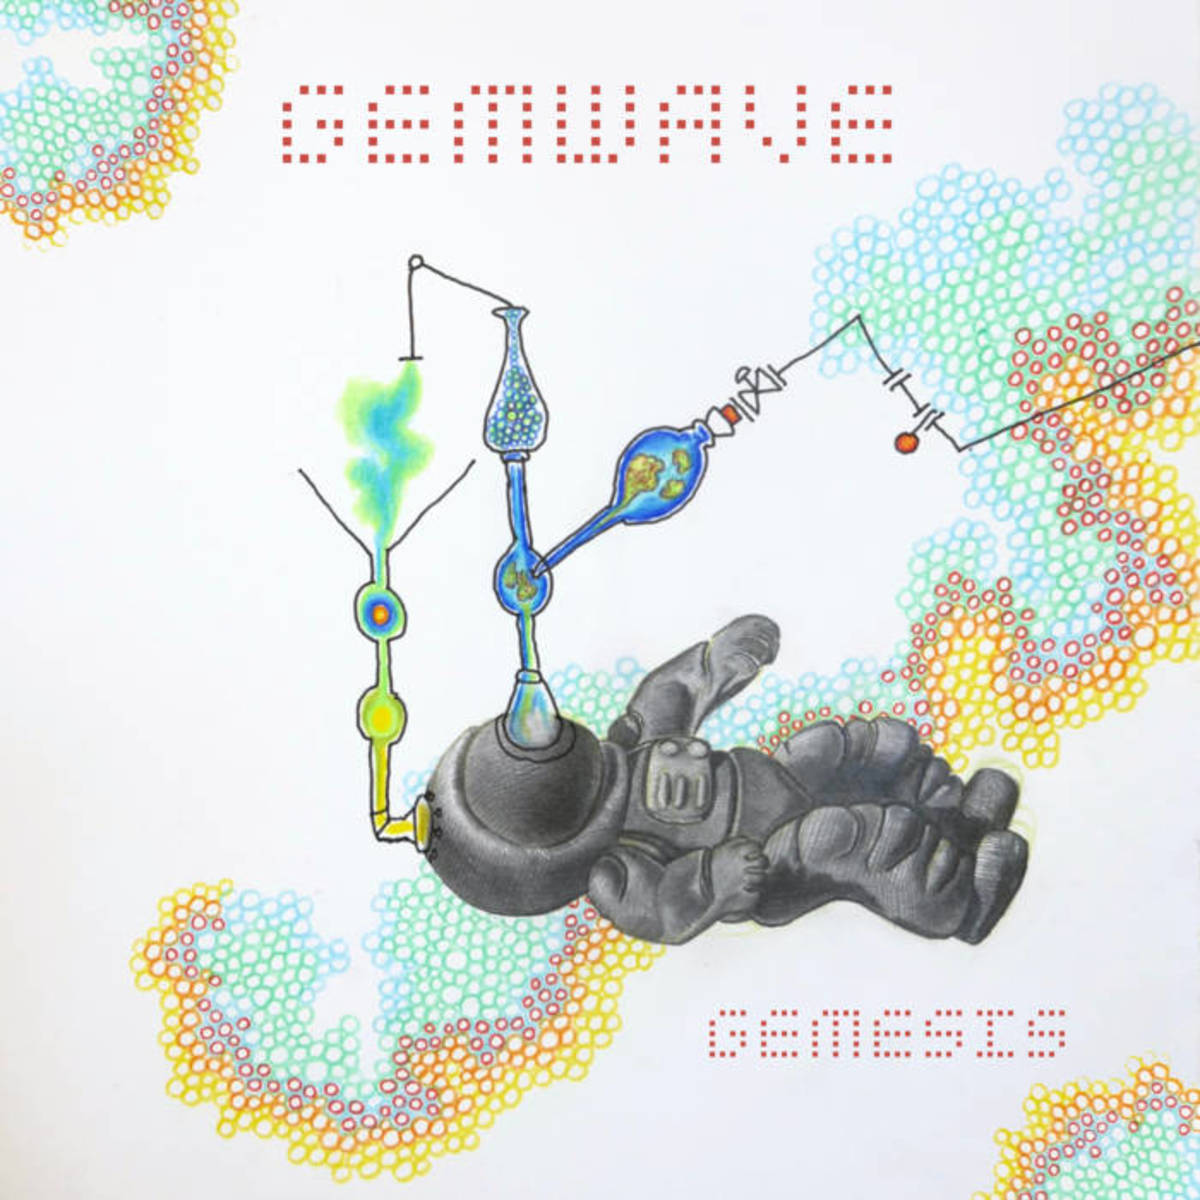 synth-ep-review-gemesis-by-gemwave